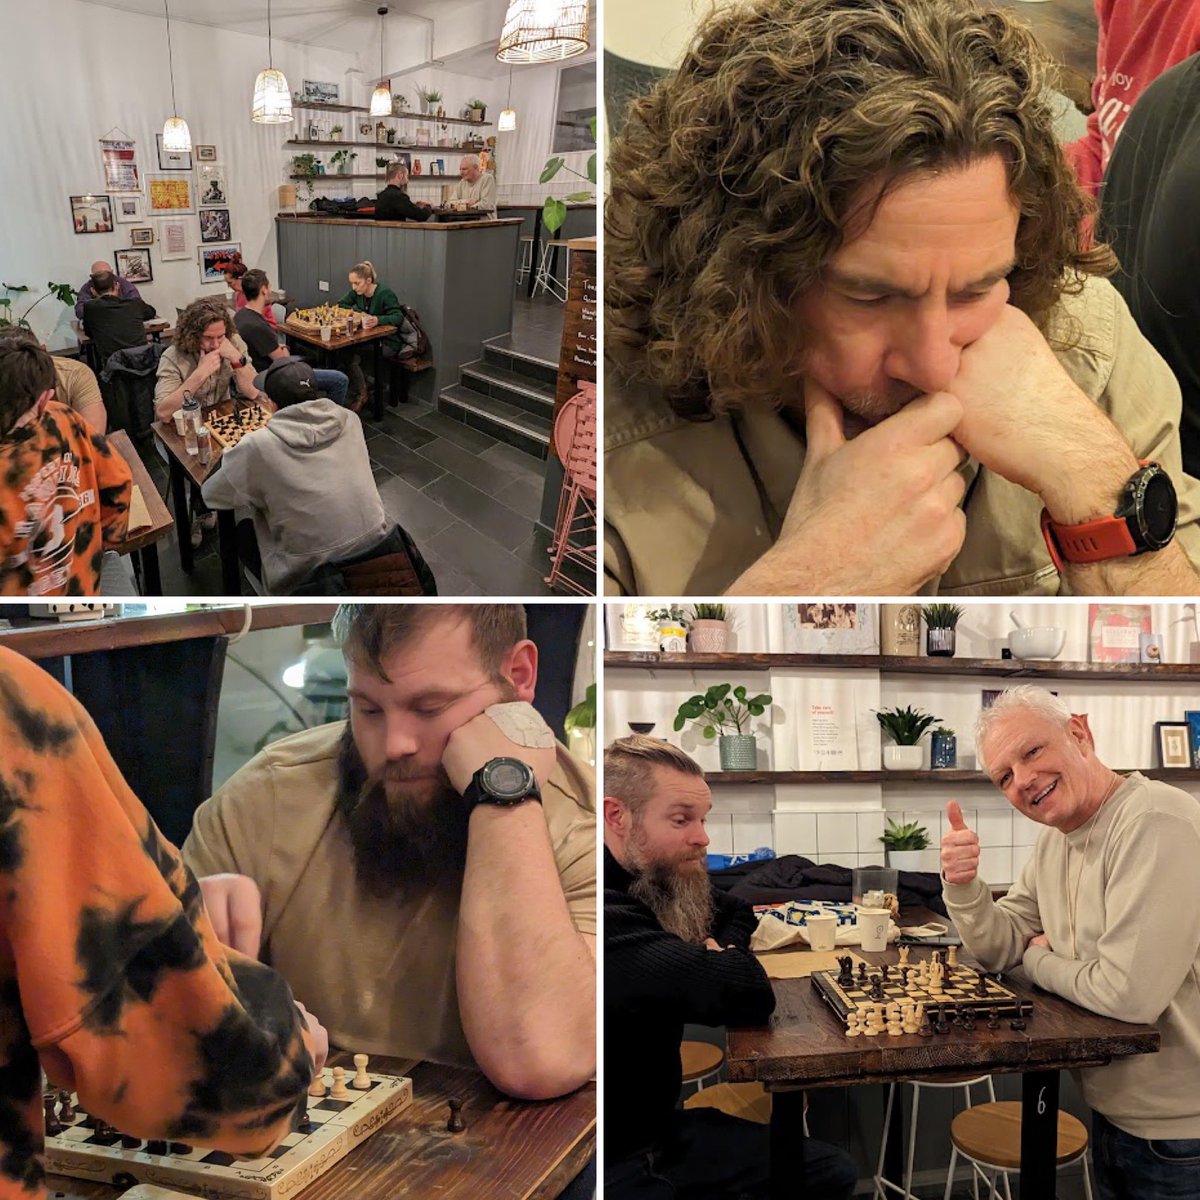 ICEGUYS CHESS CLUB at Otto Coffee in #Sunderland. There was concentration, considered moves, and a few anguished shouts of, “AH SHIT I DIDN’T SEE THAT!”
A canny night all round.
#iceguys #chess #learn #play #socialise #checkyourmates #MentalHealthAwareness